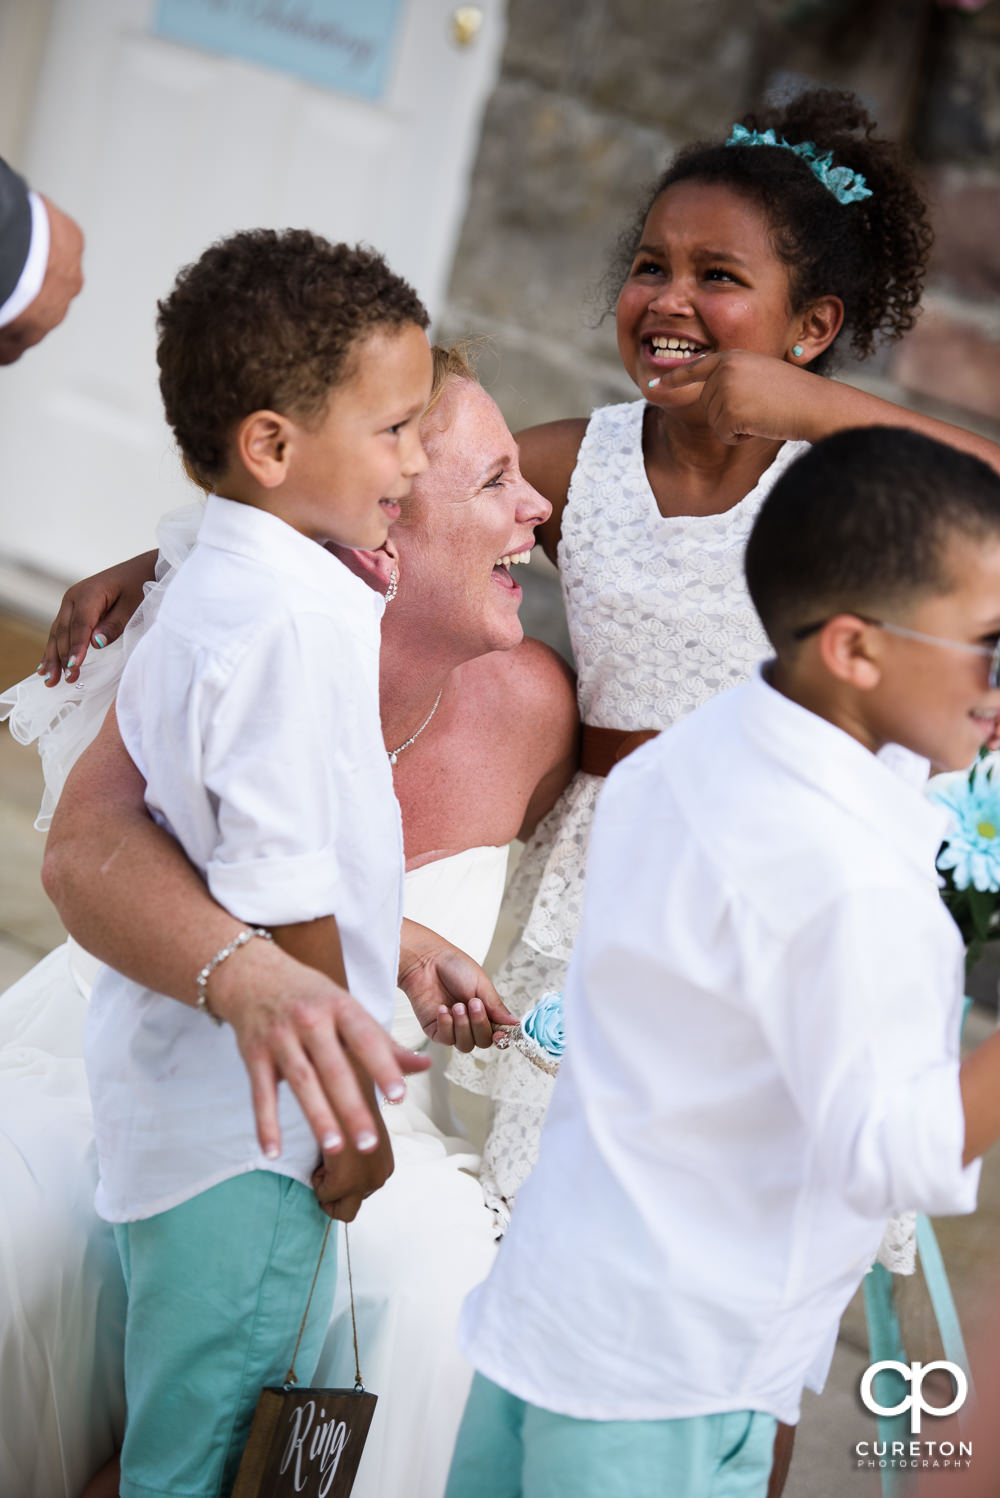 Bride and groom celebrating with their children after their wedding.